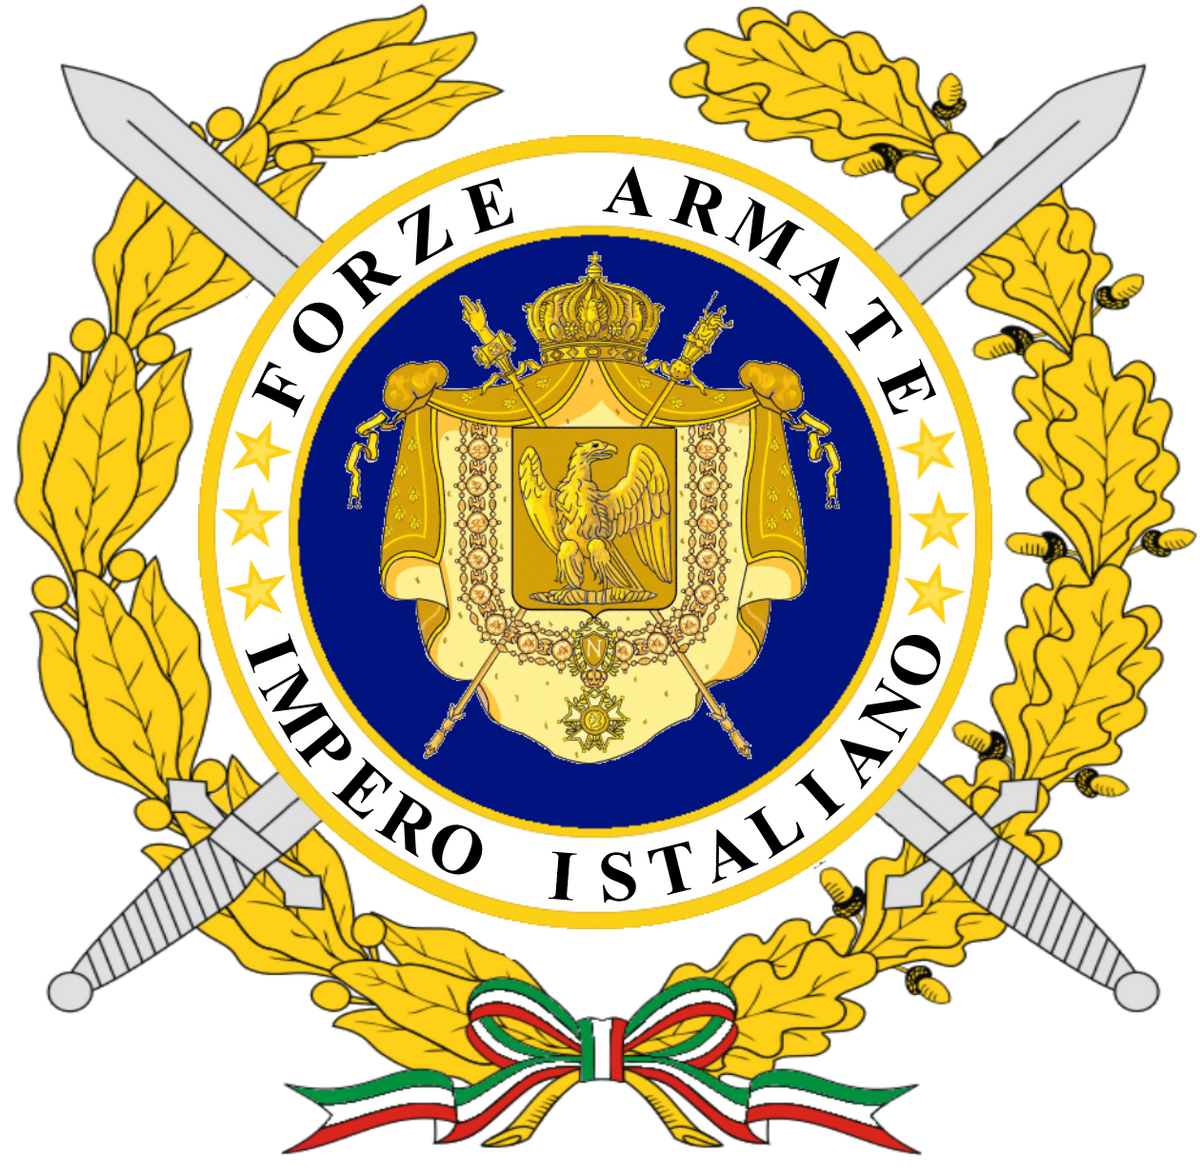 Various Armed Forces 